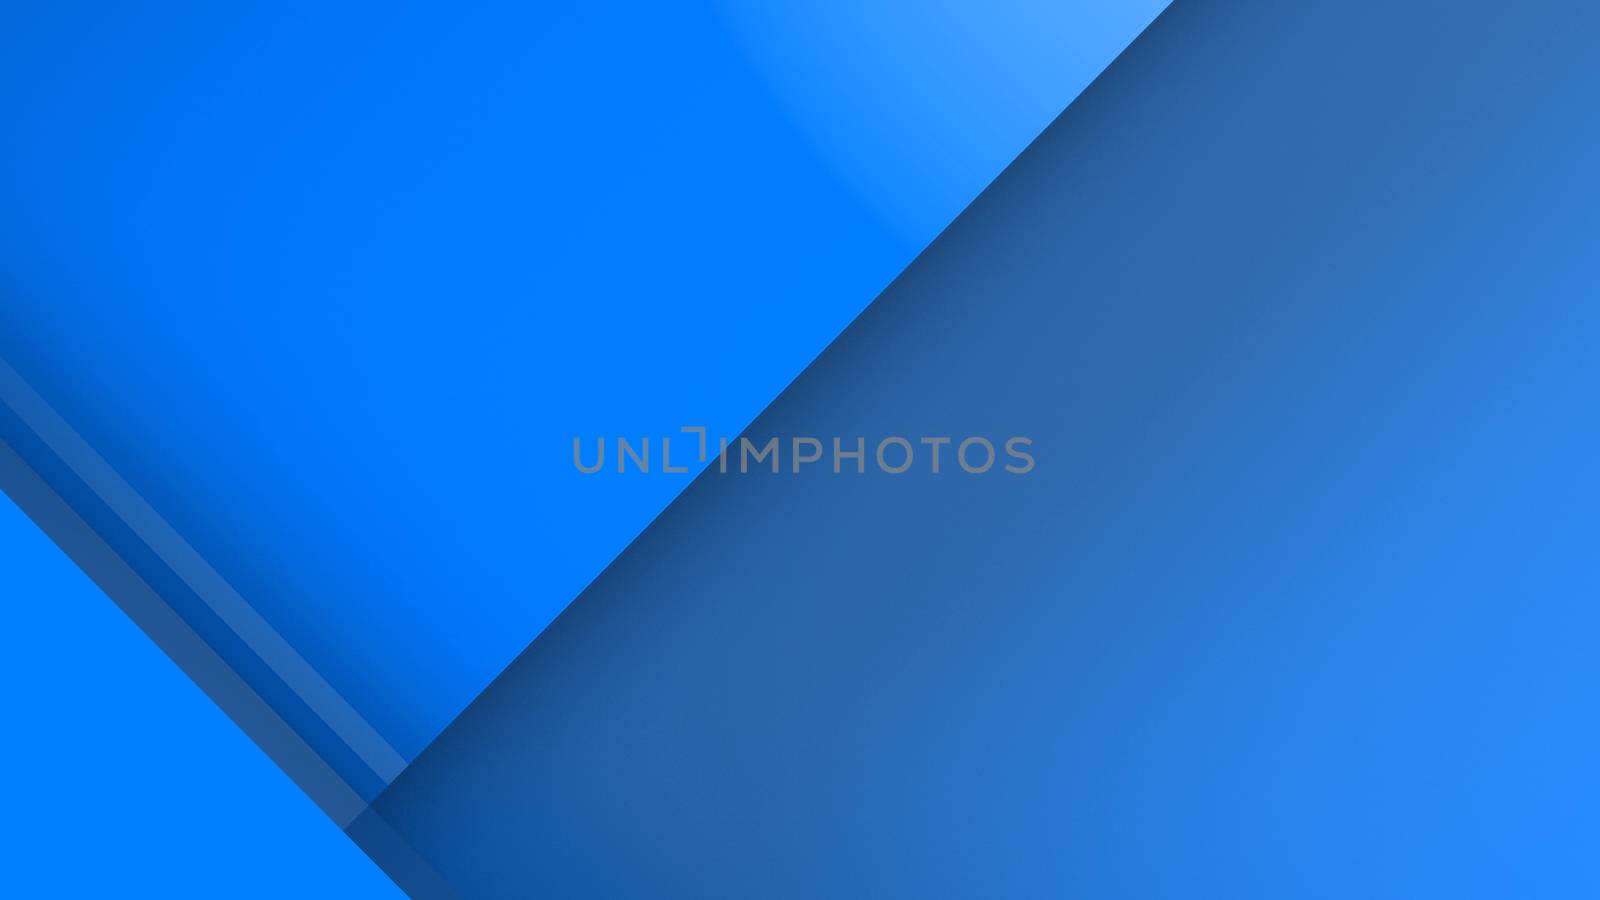 Diagonal blue dynamic stripes on color background. Modern abstract 3d render background with lines and dark shadows